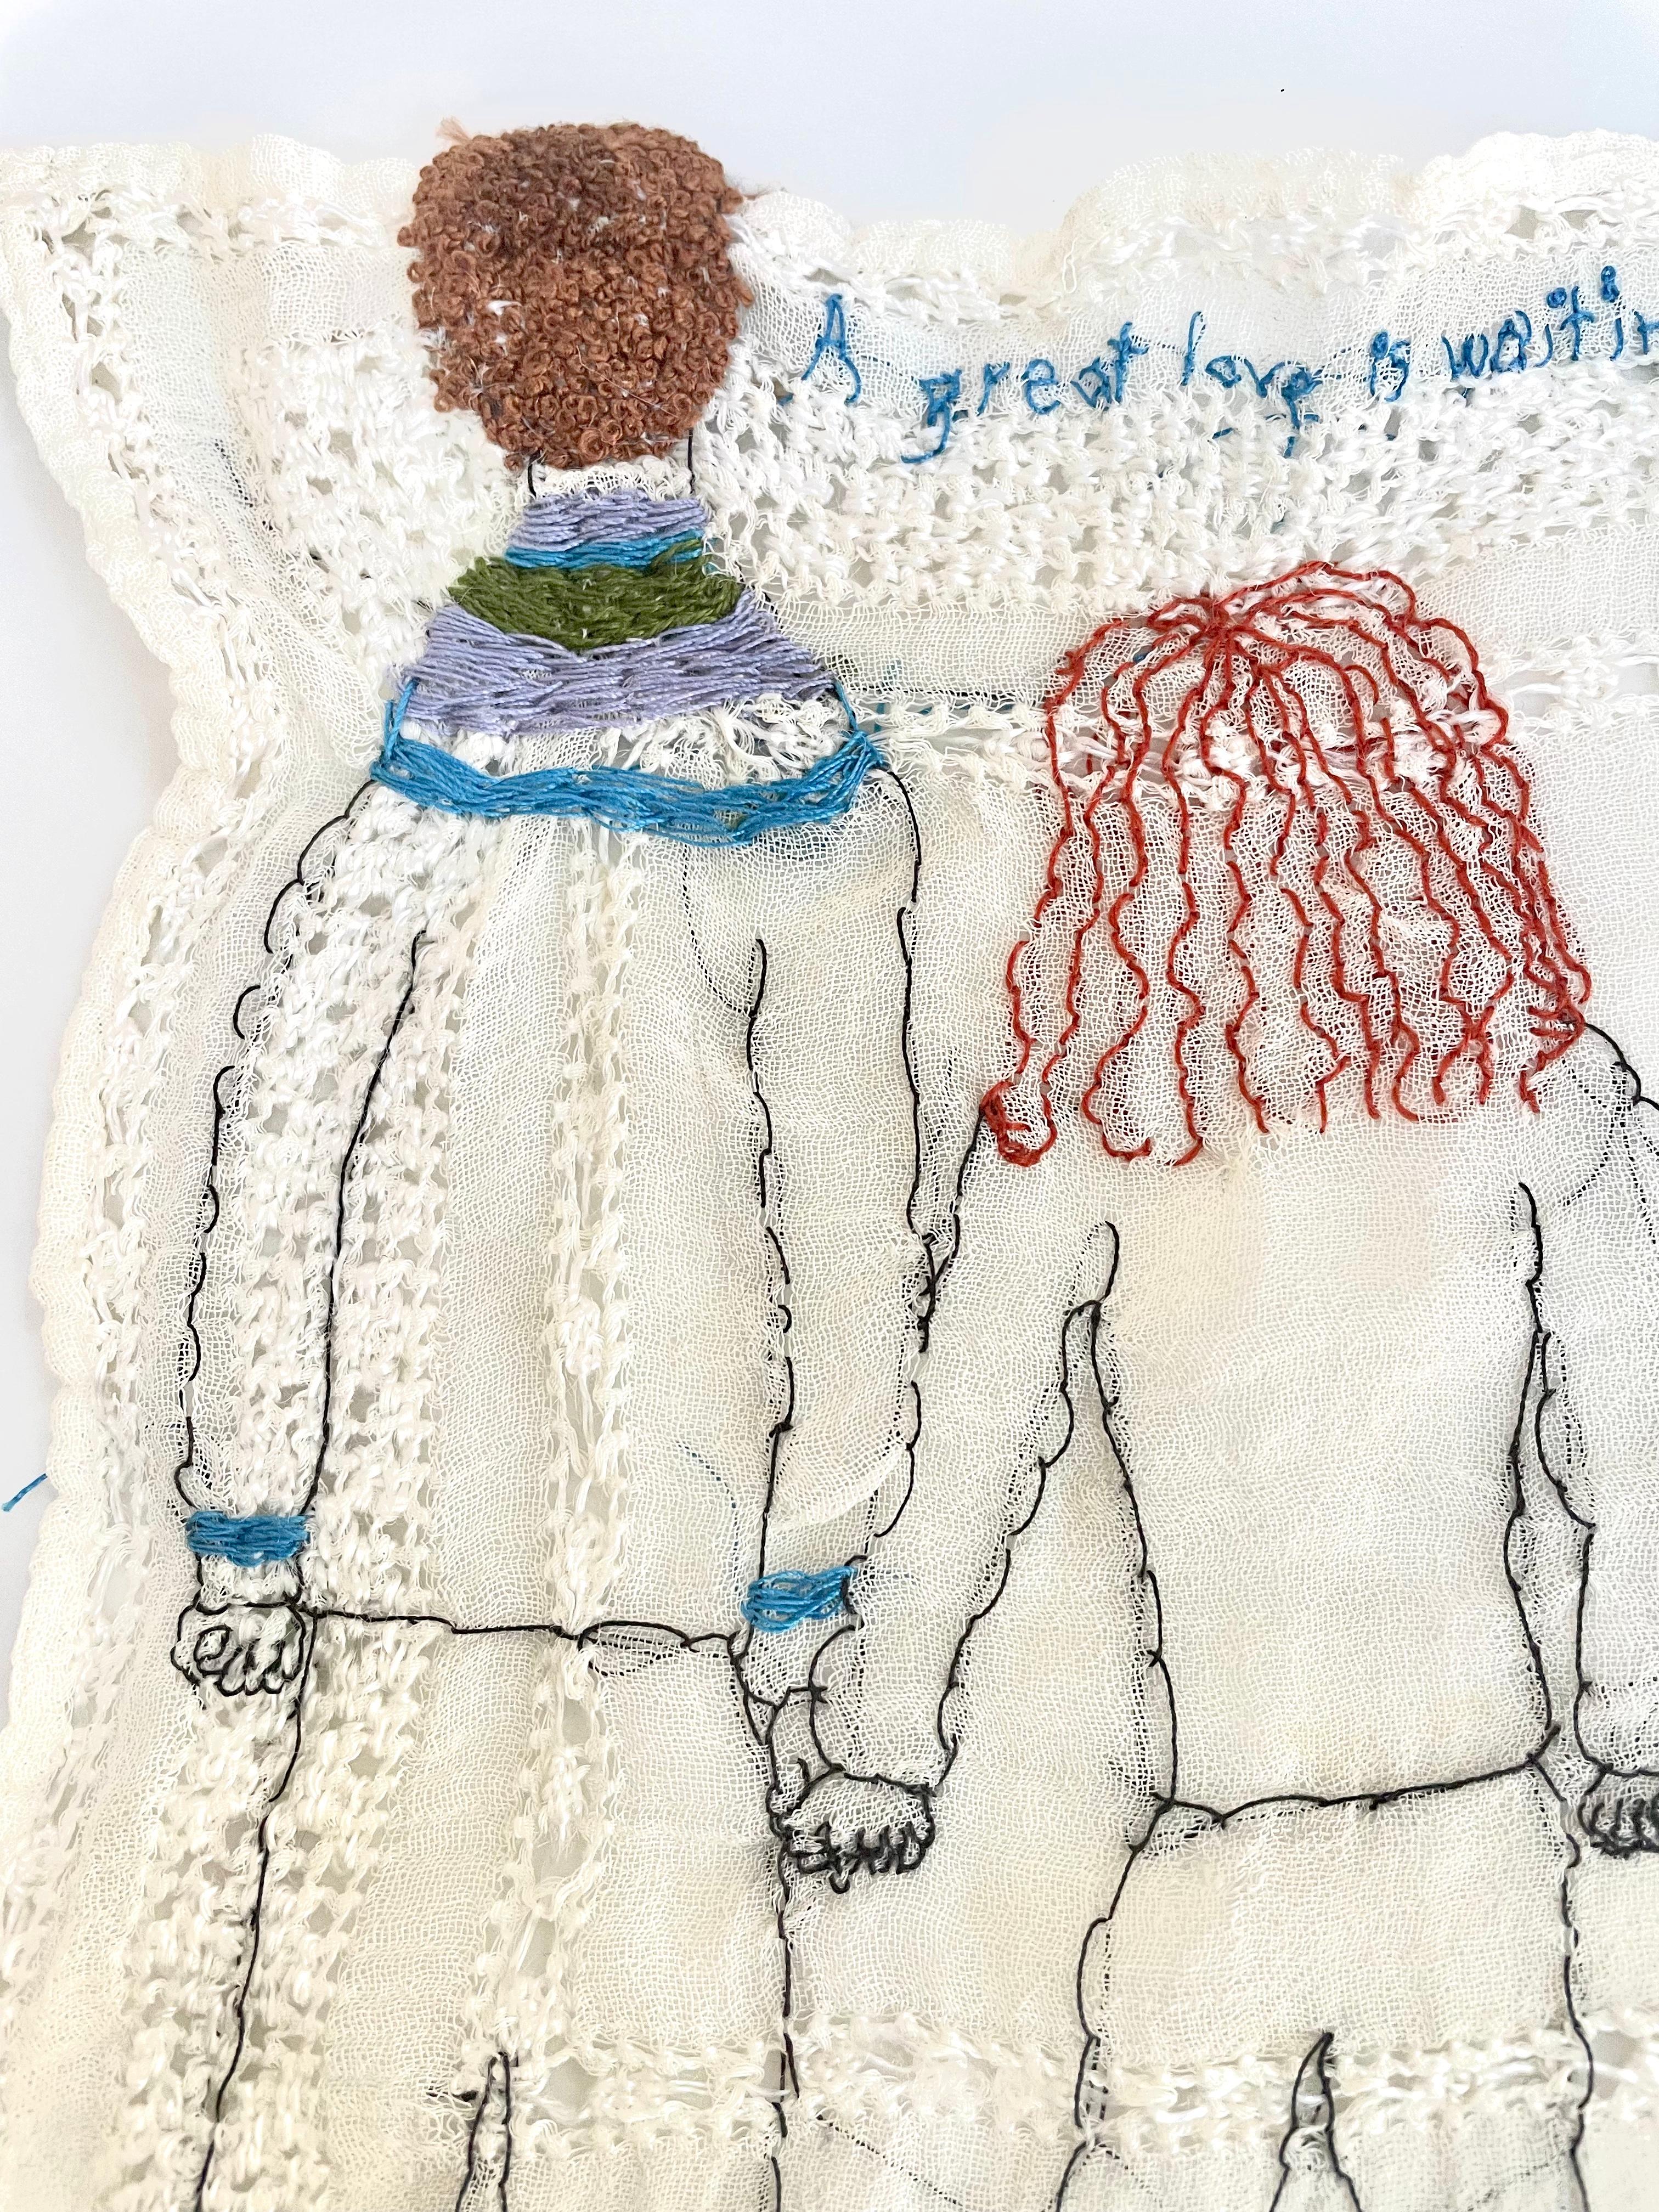 A great love is waiting for us - narrative figurative embroidered fabric - Contemporary Mixed Media Art by Iviva Olenick